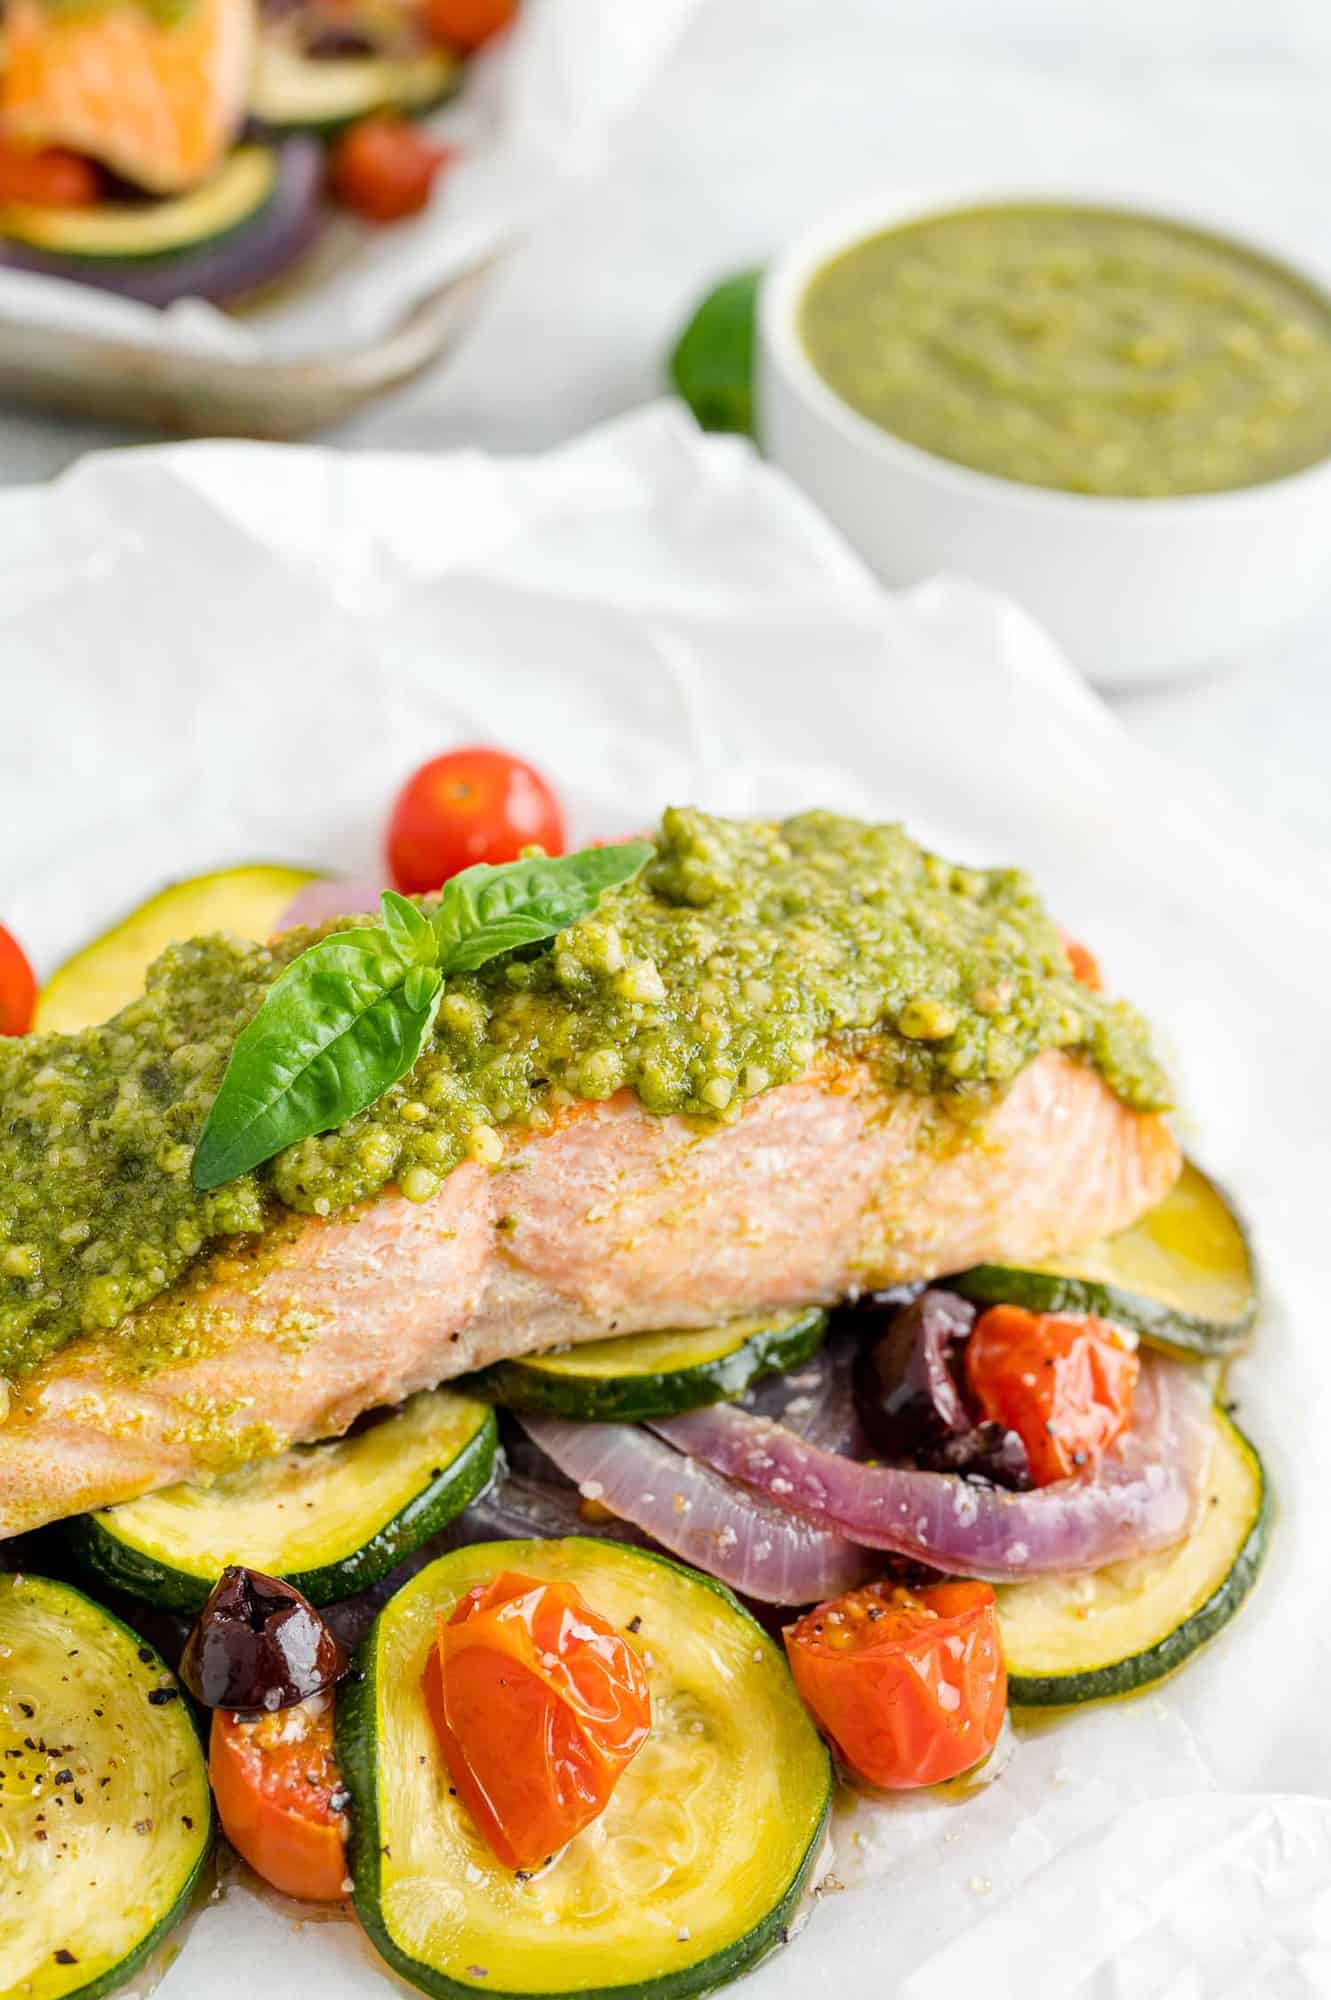 Pesto salmon with vegetables in parchment paper pouch.